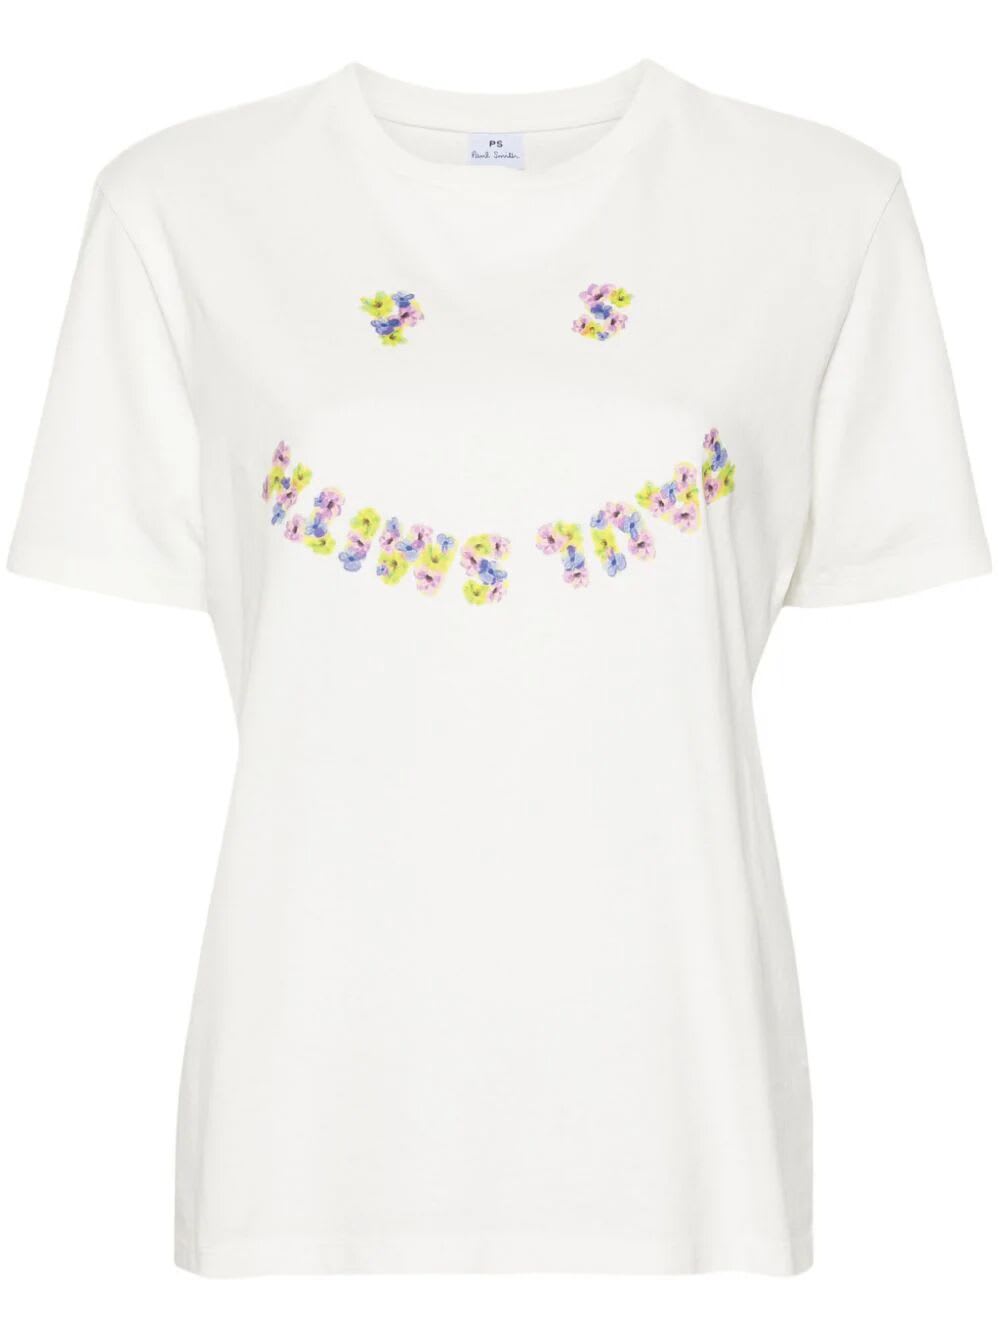 PS by Paul Smith T-shirt